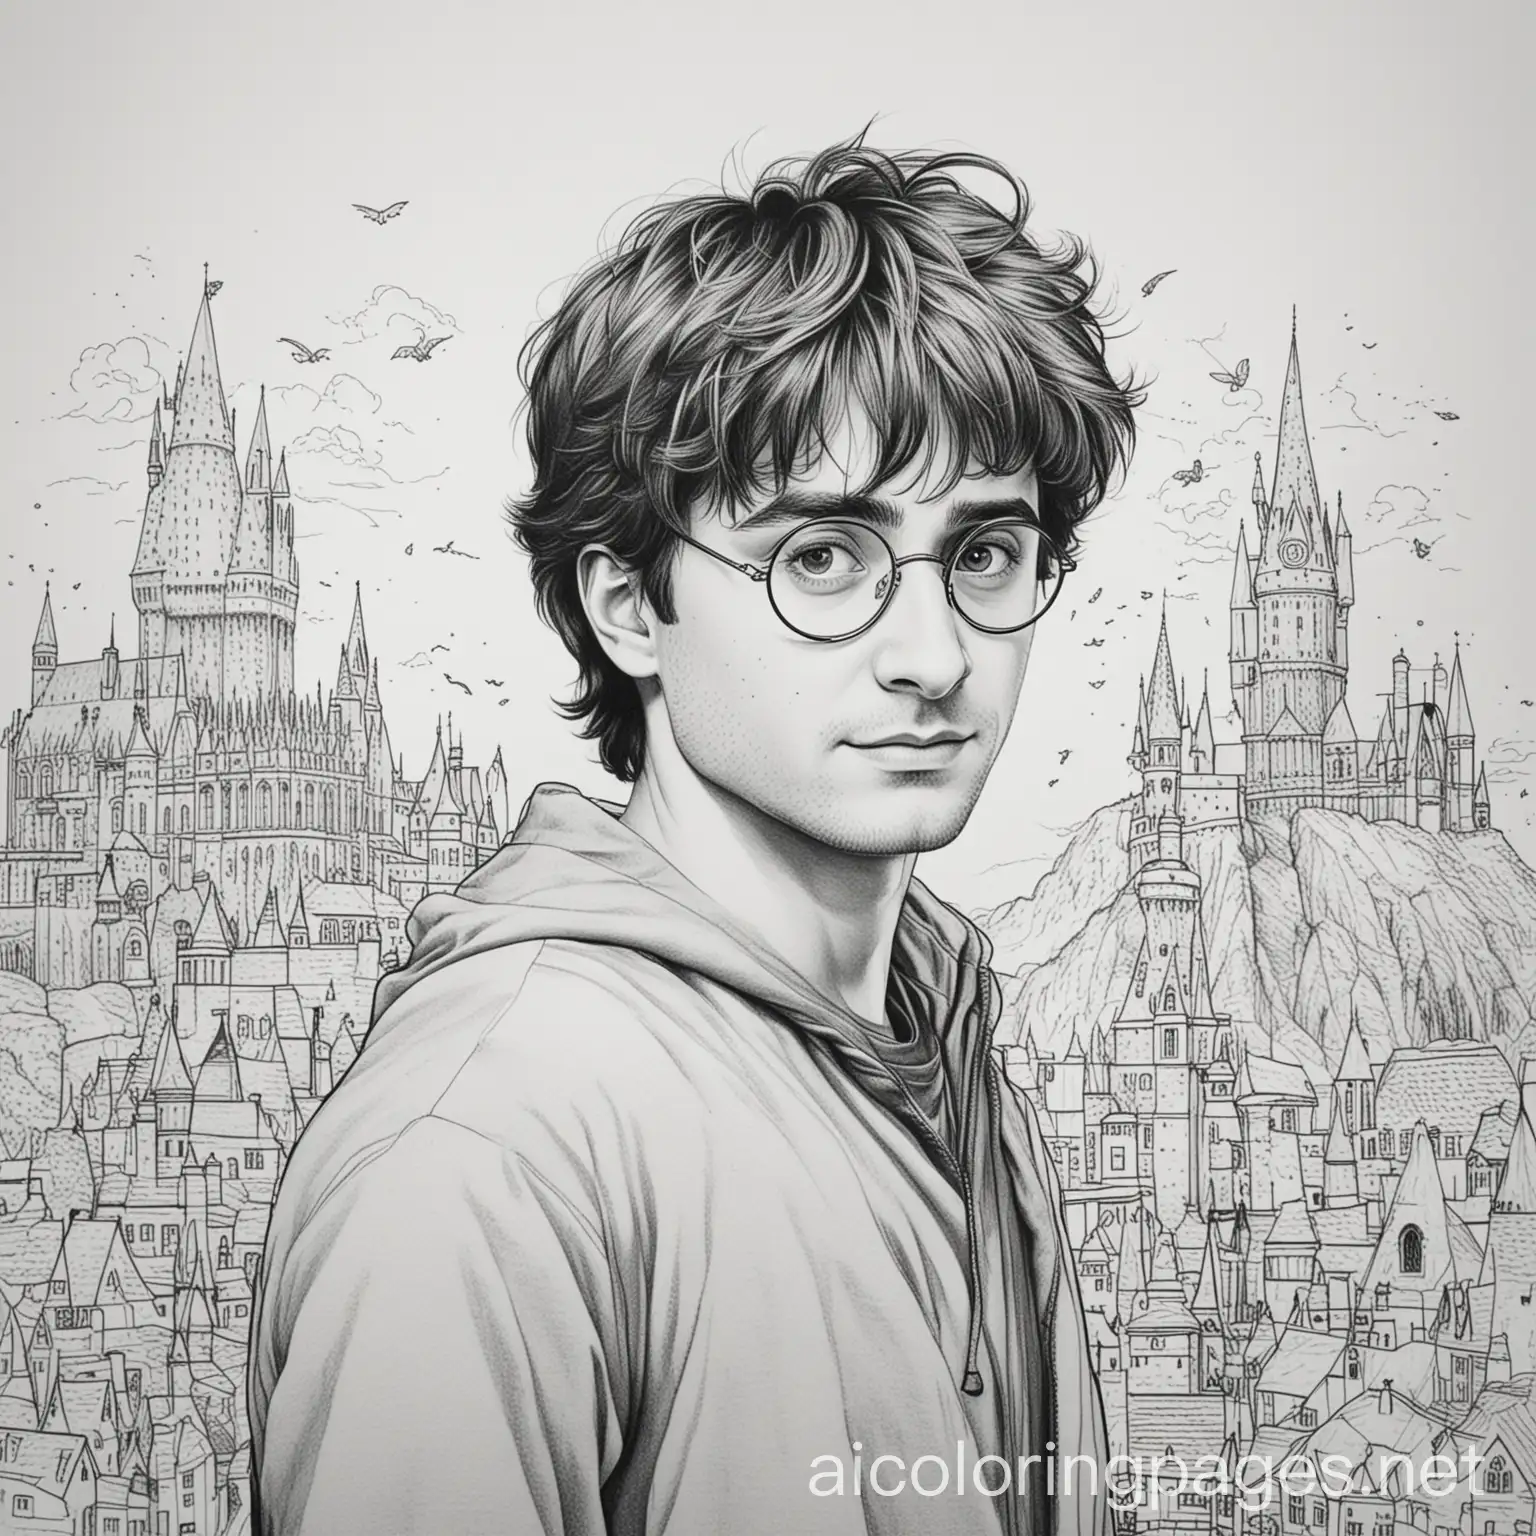 harry potter , Coloring Page, black and white, line art, white background, Simplicity, Ample White Space. The background of the coloring page is plain white to make it easy for young children to color within the lines. The outlines of all the subjects are easy to distinguish, making it simple for kids to color without too much difficulty